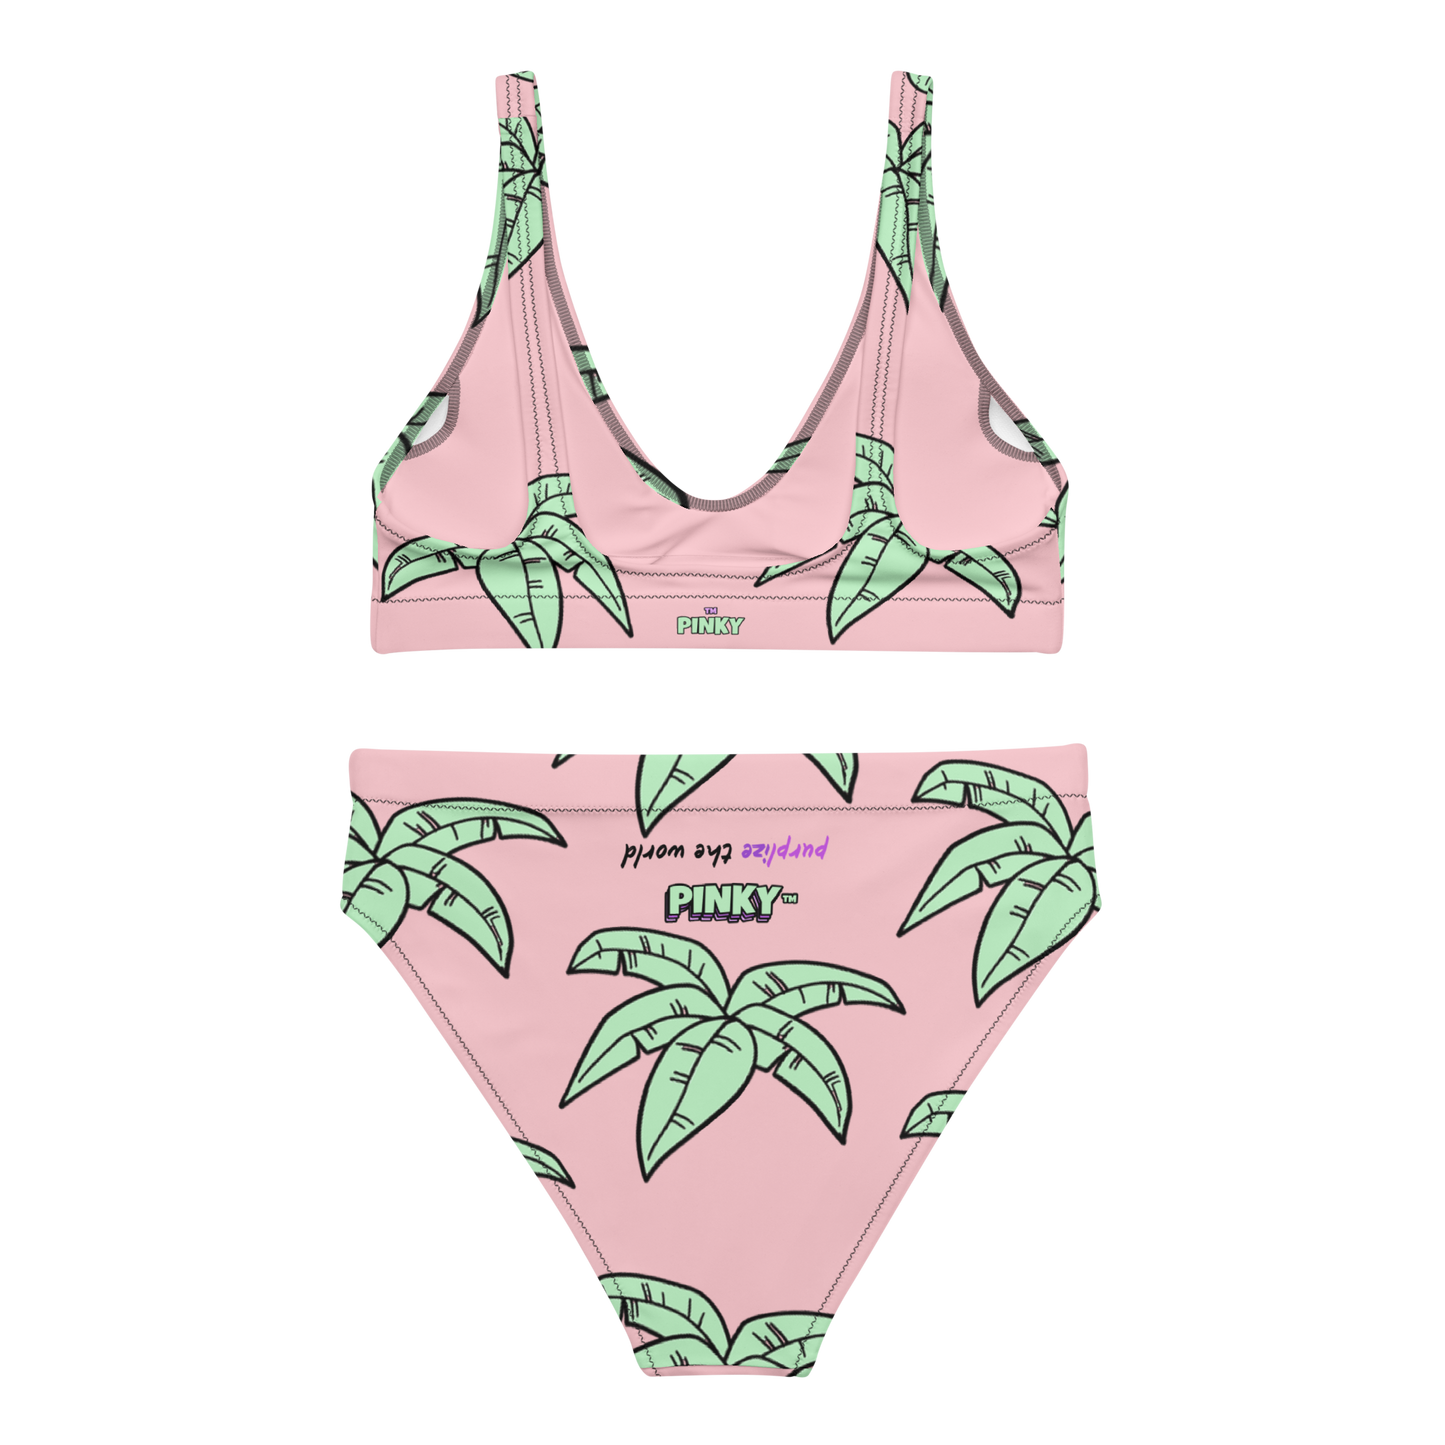 Maillot de bain 2 pièces - PALM & CHILL - Pinky™ - The Brand PlusDePurp.©